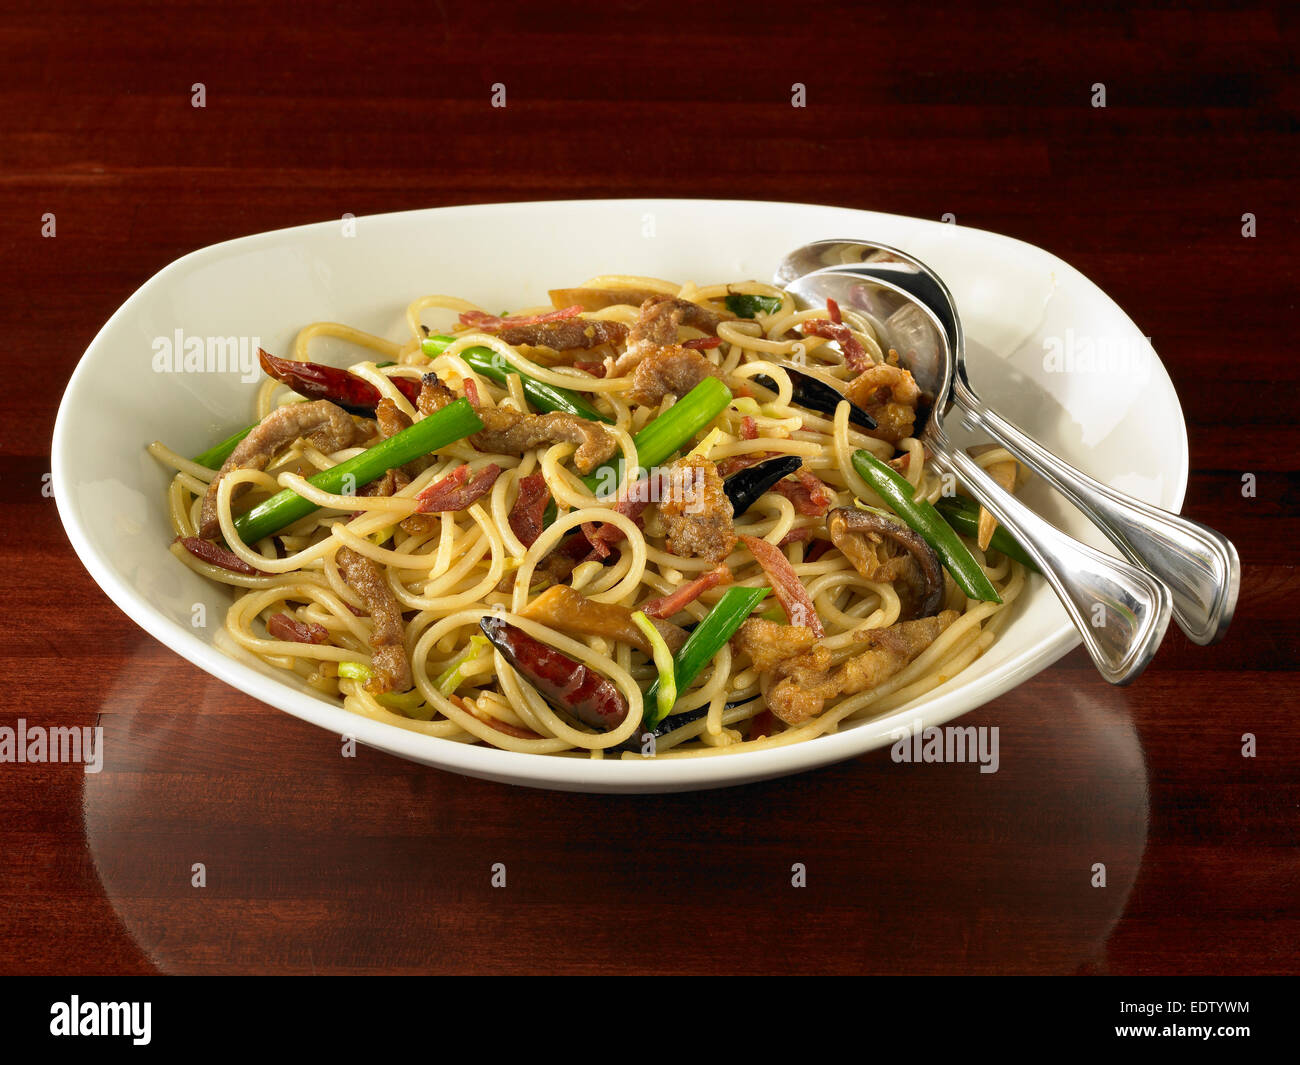 Spicy Pork and Fried Noodles Stock Photo